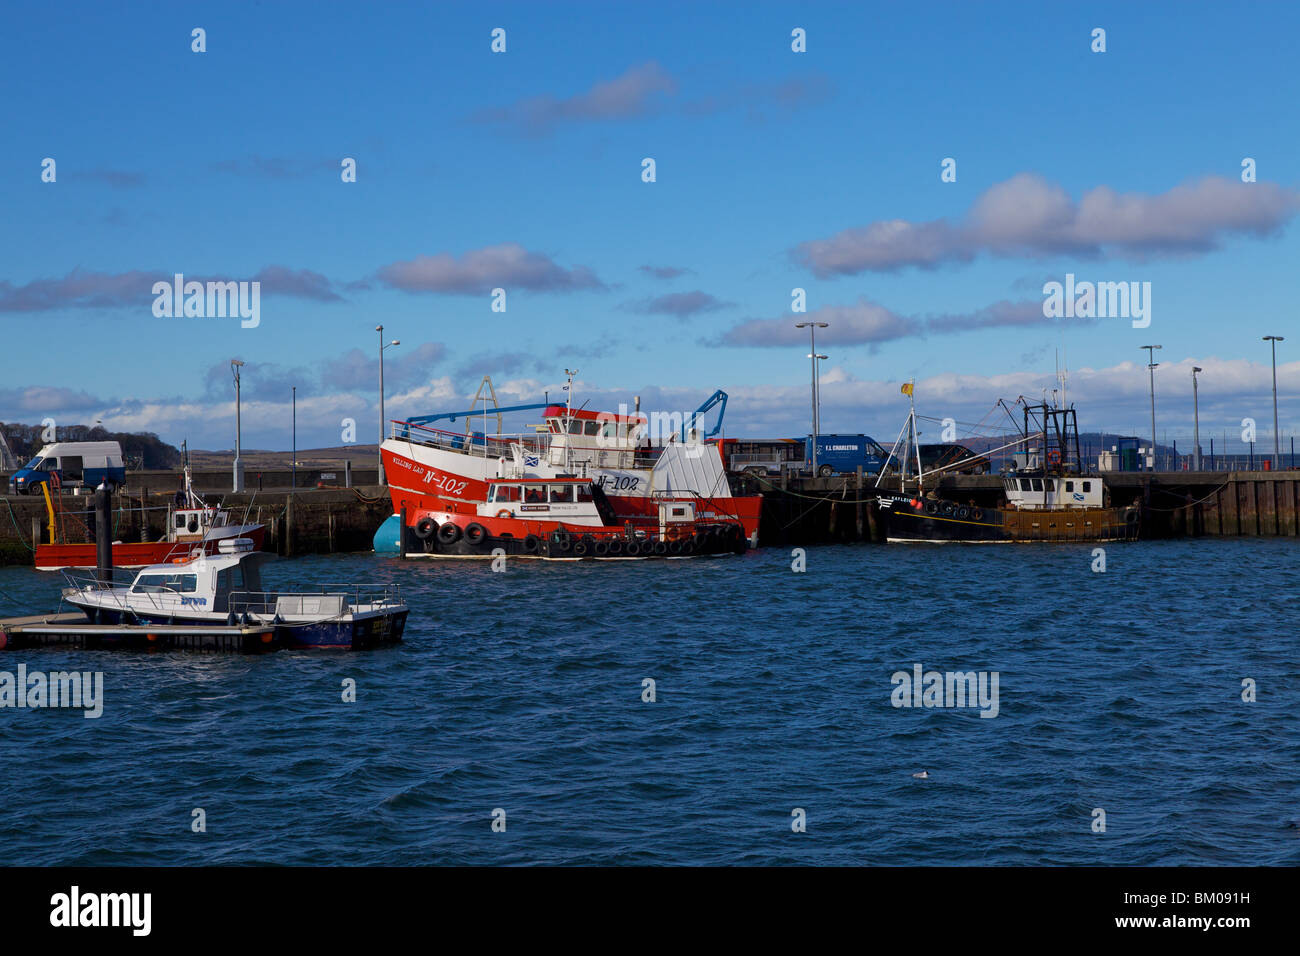 Fishing boats in Stranraer Harbour, Dumfries & Galloway, Scotland Stock Photo